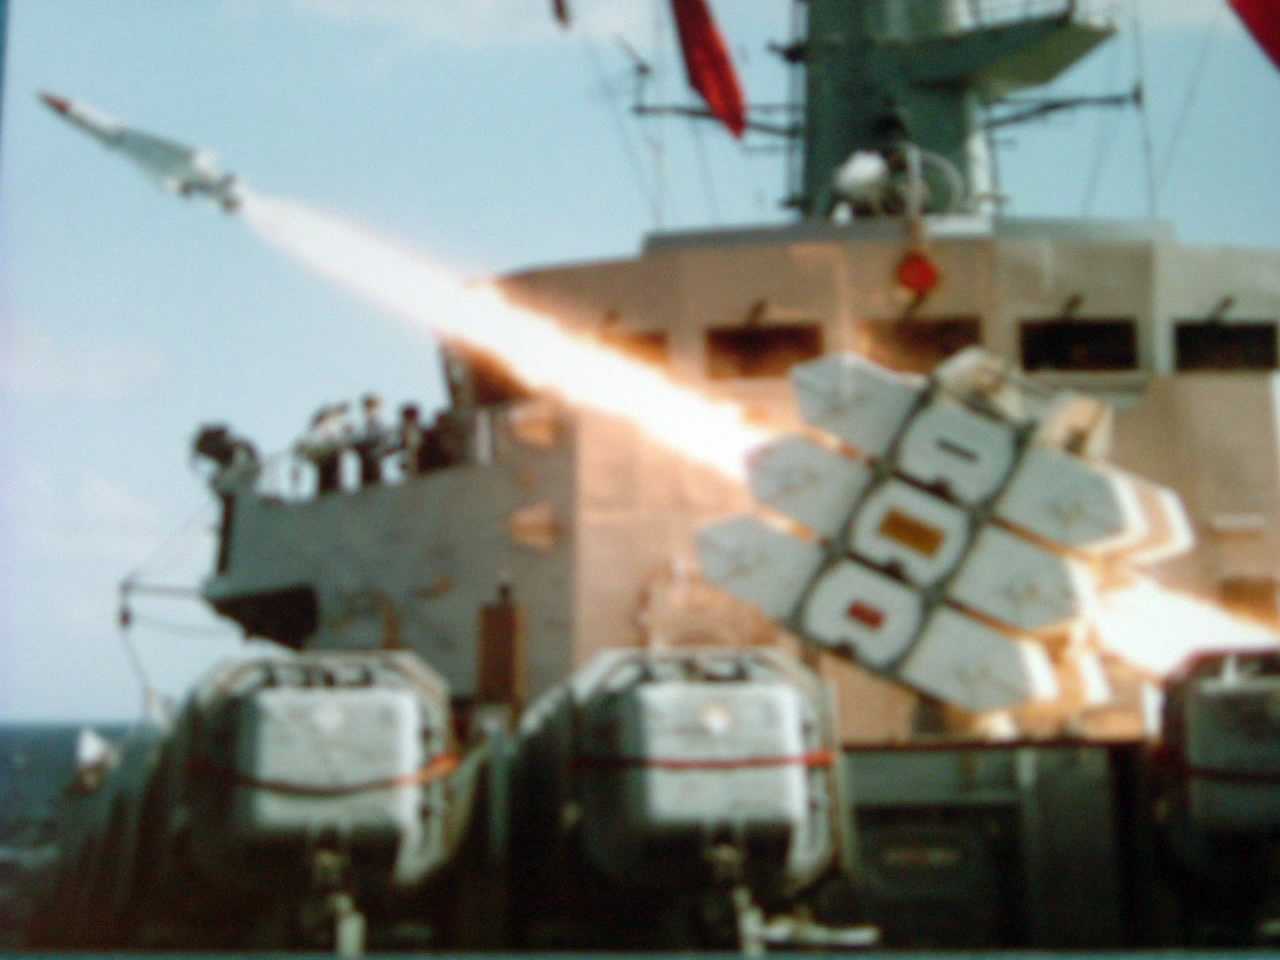 A Seawold Missile firing from the HMS Brazen in 1985